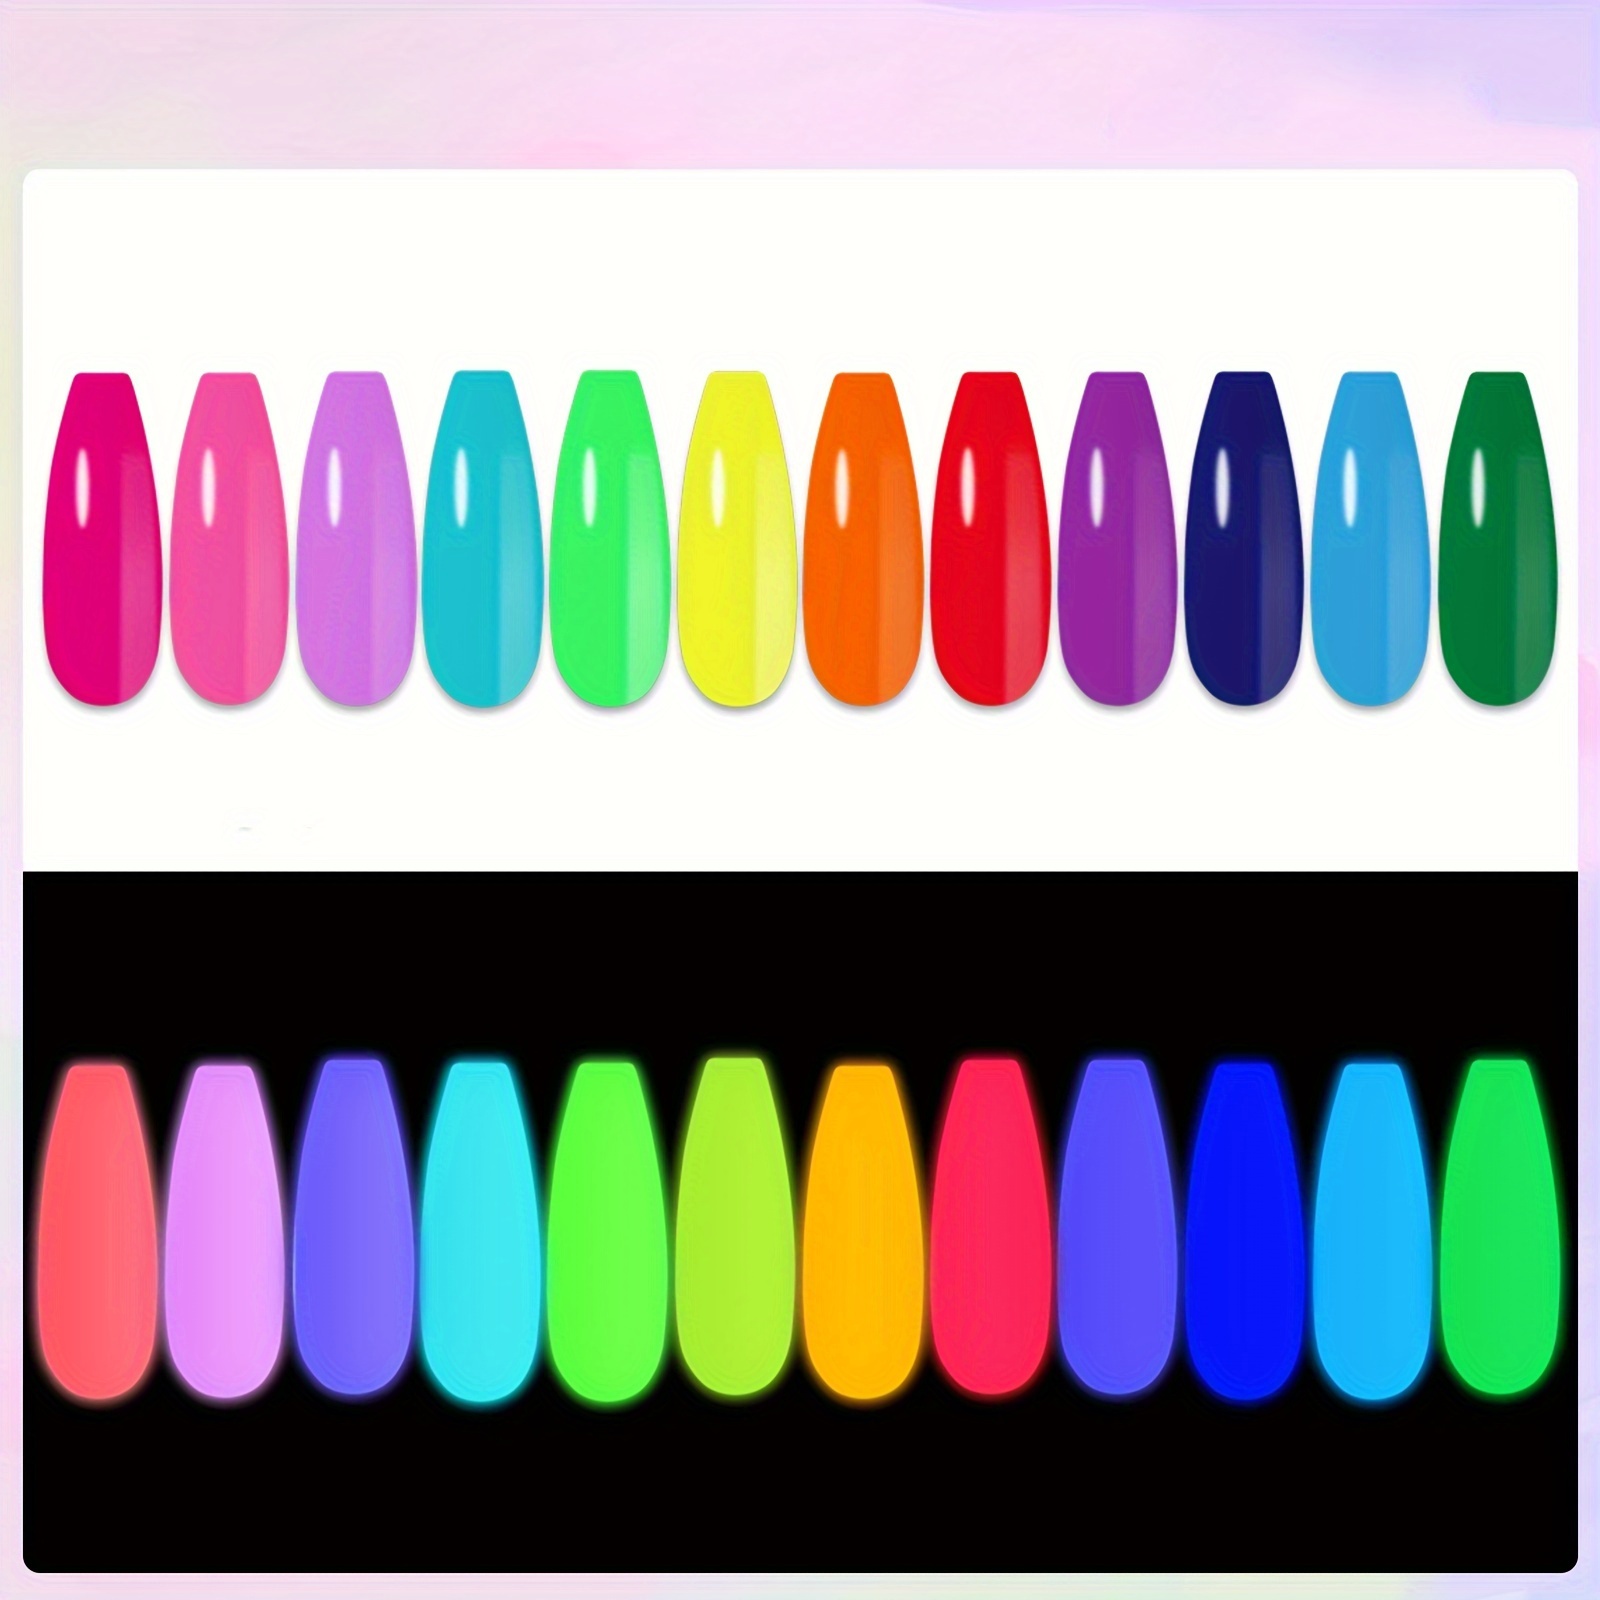 

12-piece Glow-in-the-dark Gel Nail Polish Set - 7ml Each, Alcohol-free, Long-lasting & Vibrant Colors For All Seasons